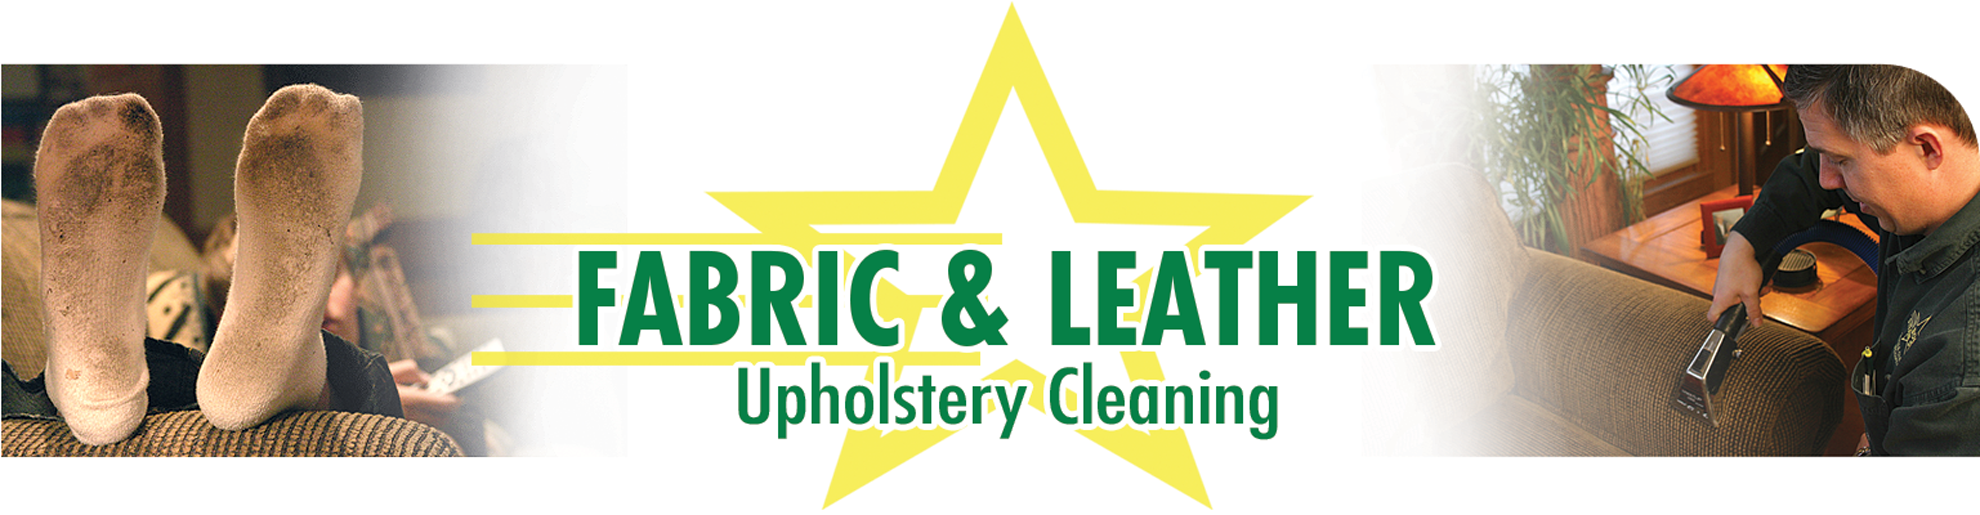 Fabric & Leather Upholstery Cleaning